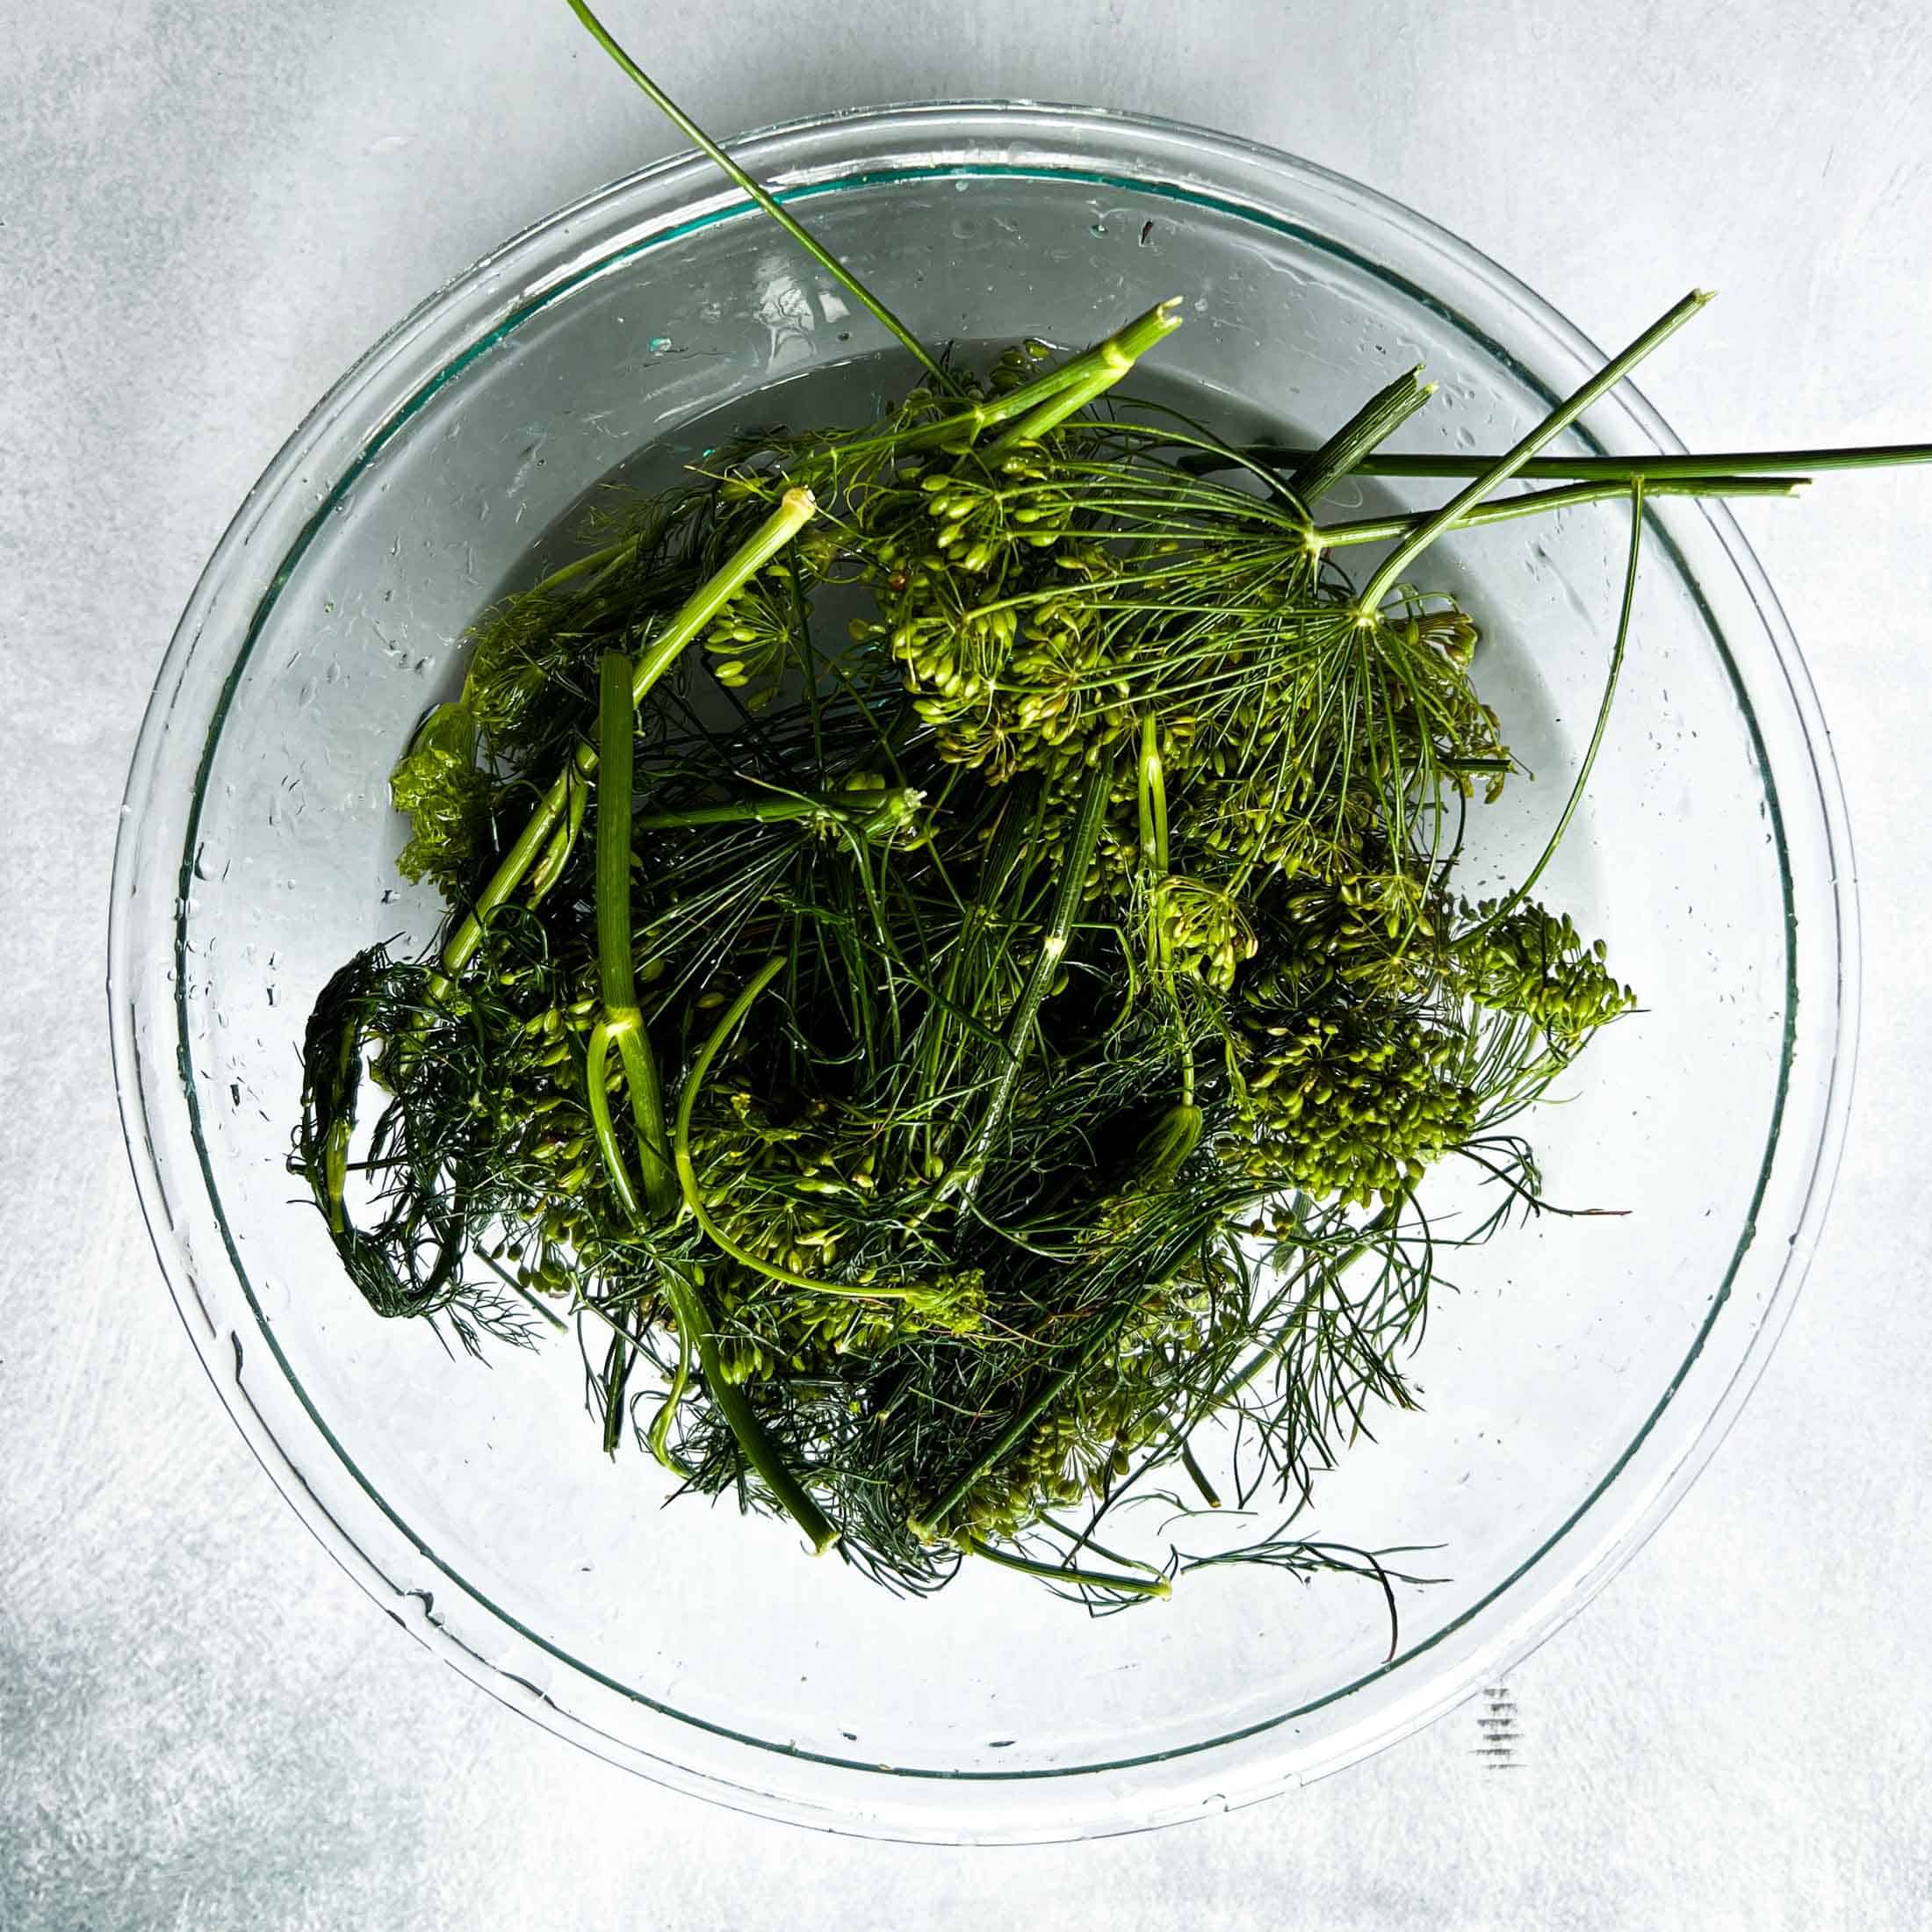 Dill flowers and sprigs submerged in water in a large glass bowl.